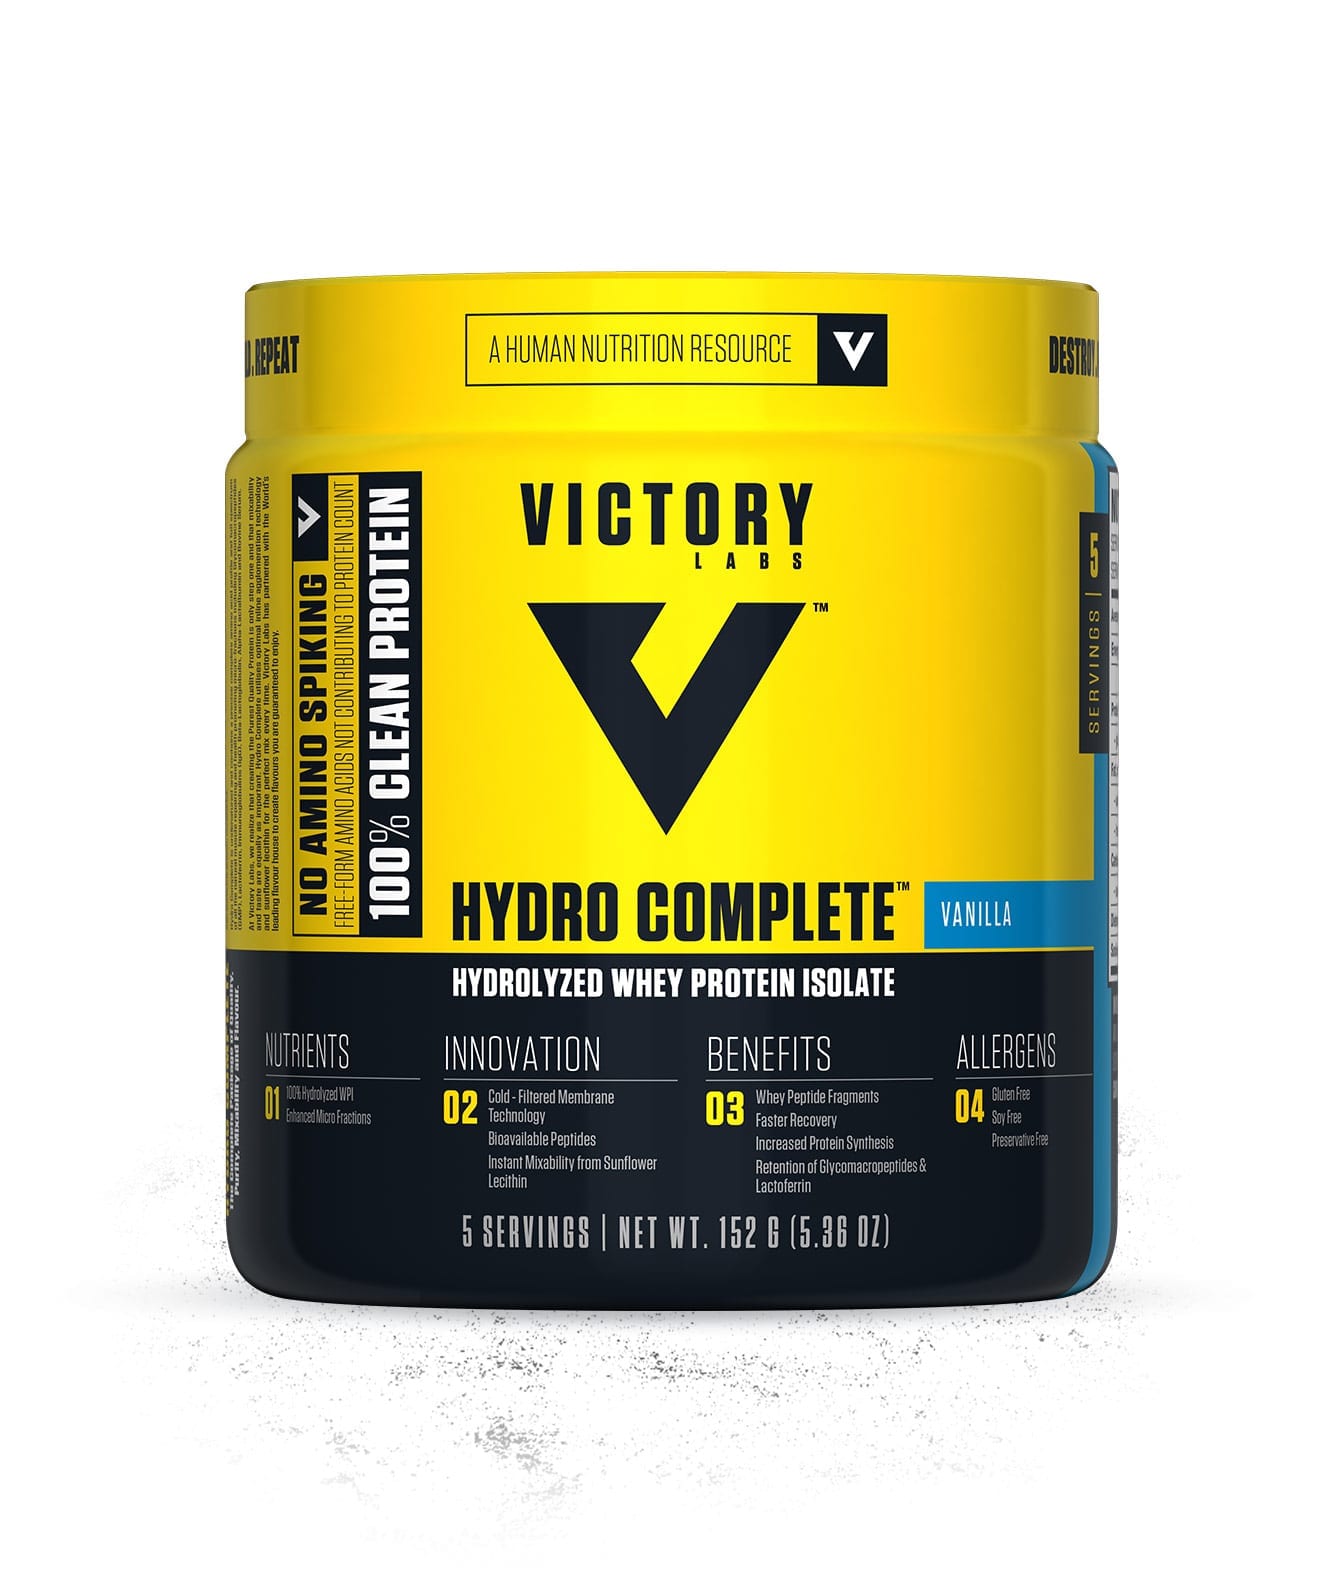 victory labs supplement packaging design